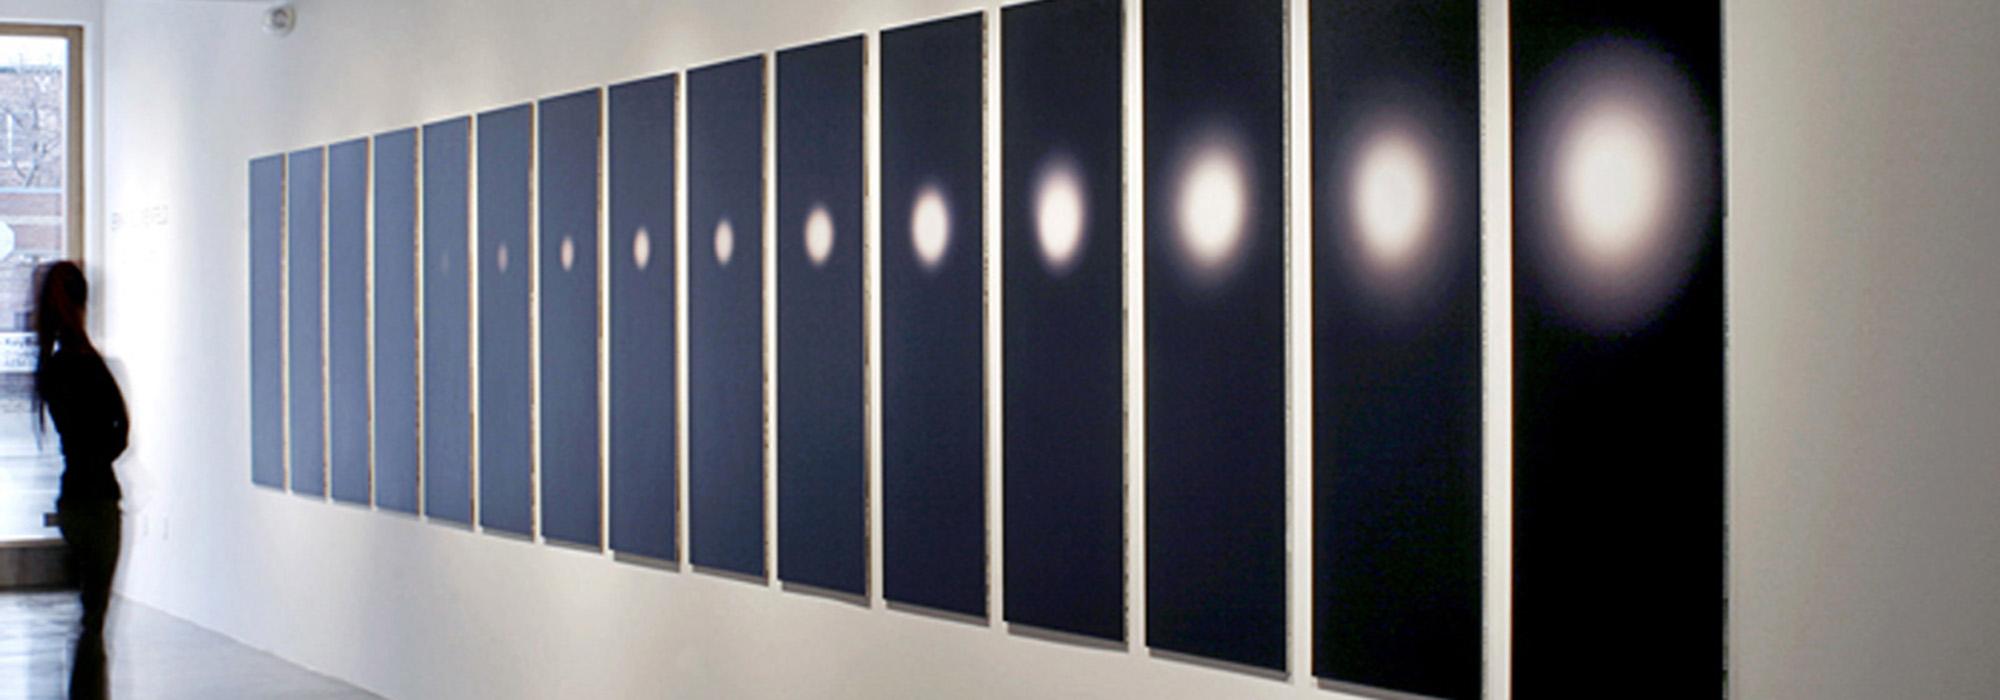 Light Recording: Greatest Lunar Apogee/Perigee of 2004. Installation view: RULE Gallery, Denver, CO, solo exhibition, 2006 - Photo courtesy Erika Blumenfeld